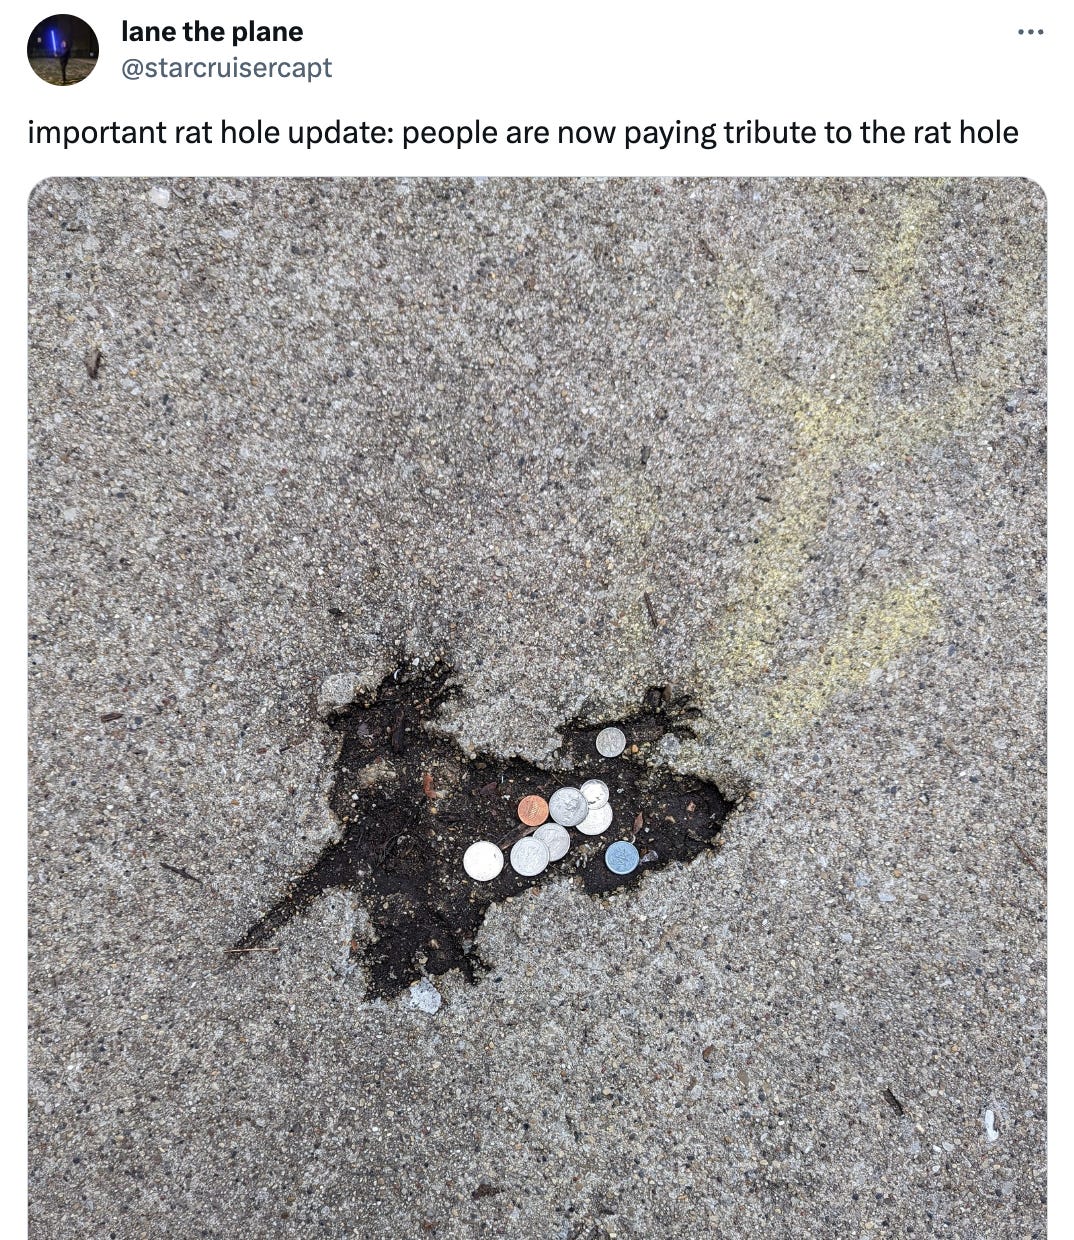 The rat hole, but with coins in it.